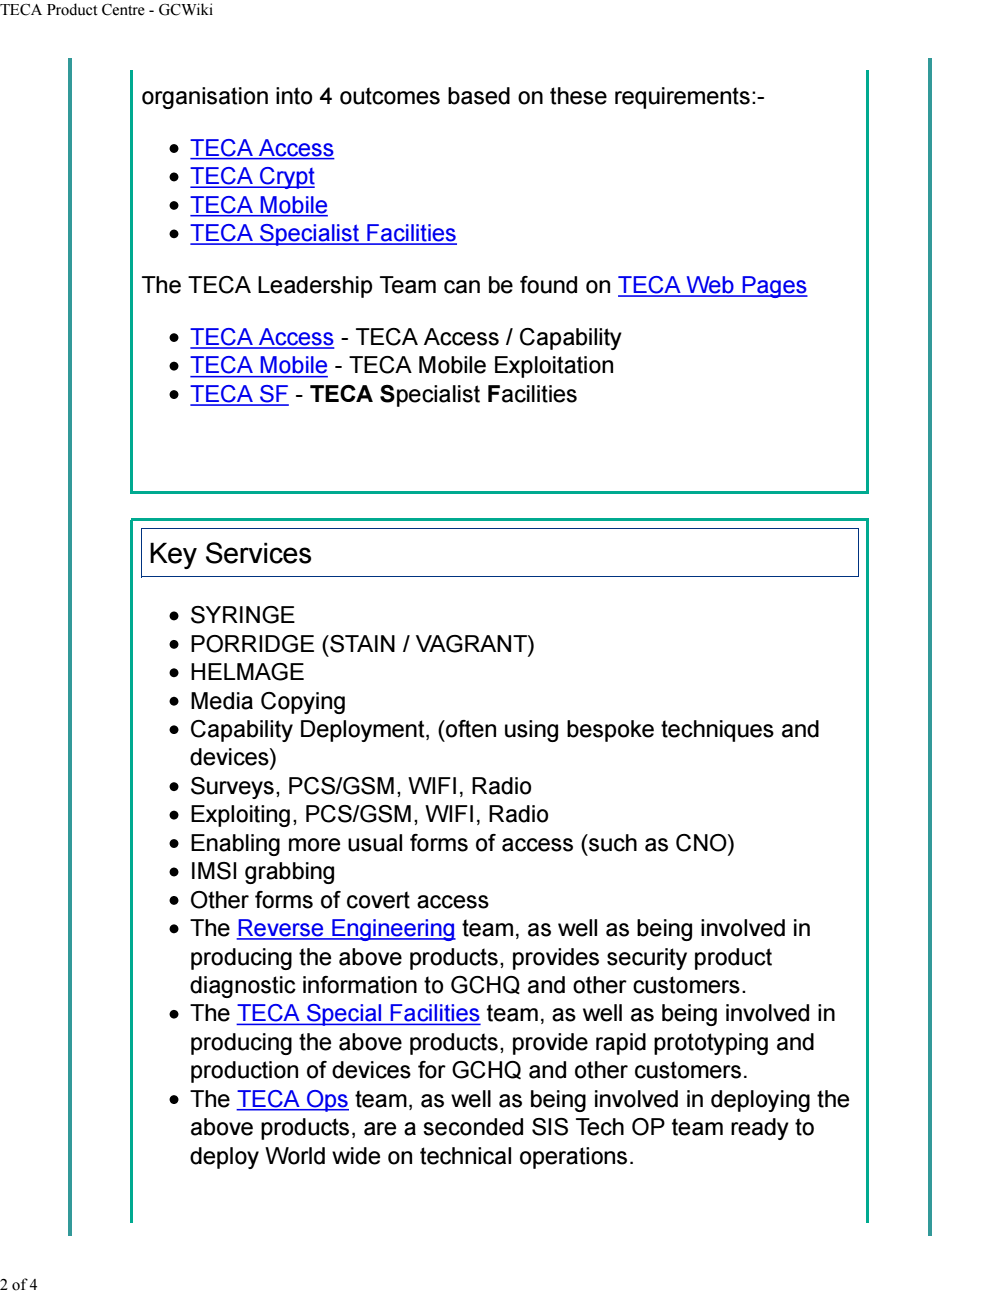 Page 2 from TECA Product Centre – GCHQ Wiki